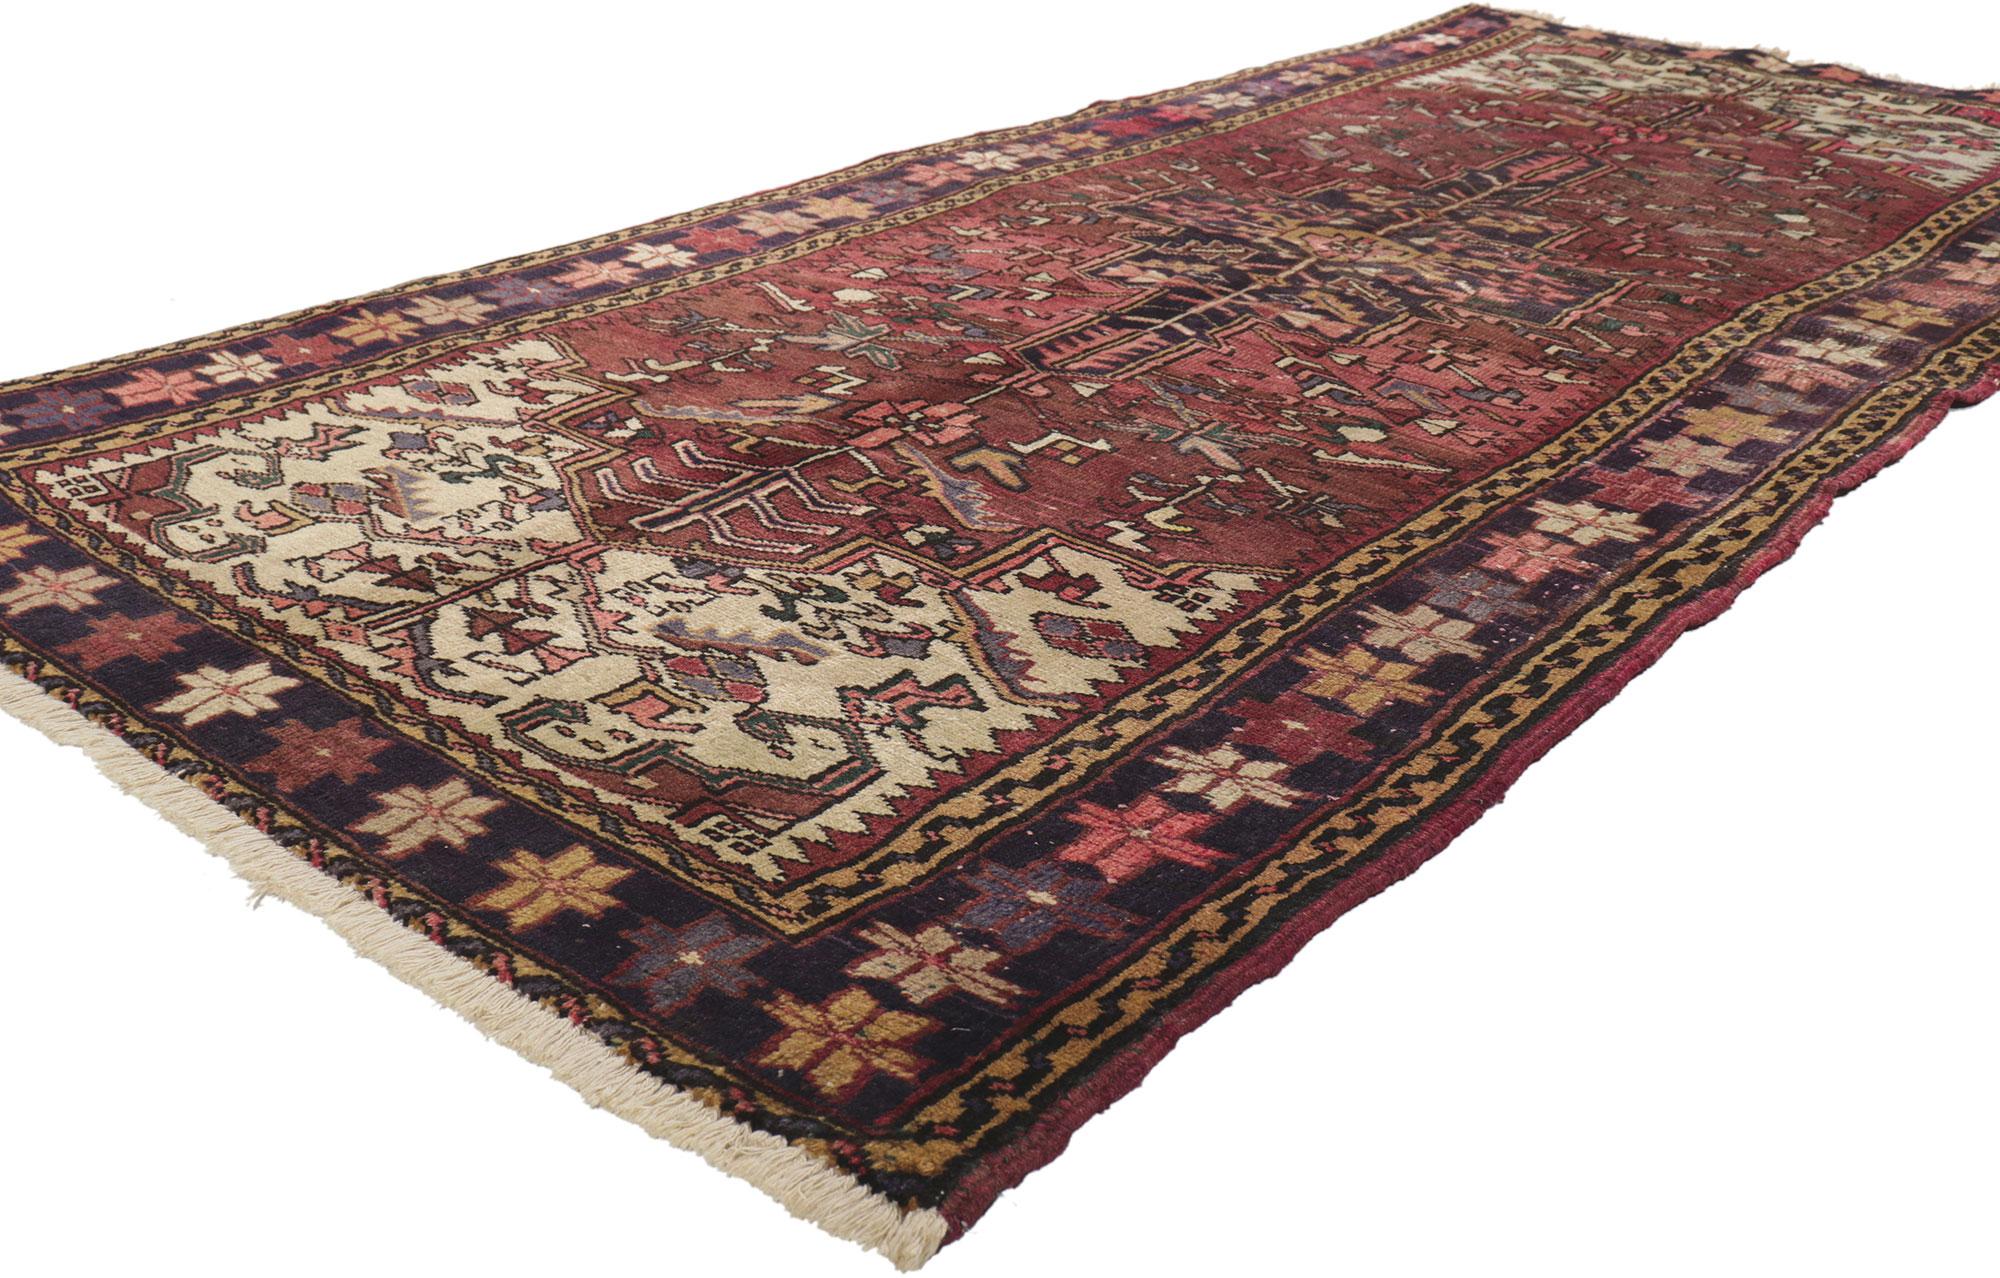 76745 Vintage Persian Heriz Rug Runner, 03'08 x 08'04.
Emanating timeless style with incredible detail and texture, this hand-knotted wool vintage Persian Heriz rug is a captivating vision of woven beauty. The geometric design and earthy colorway